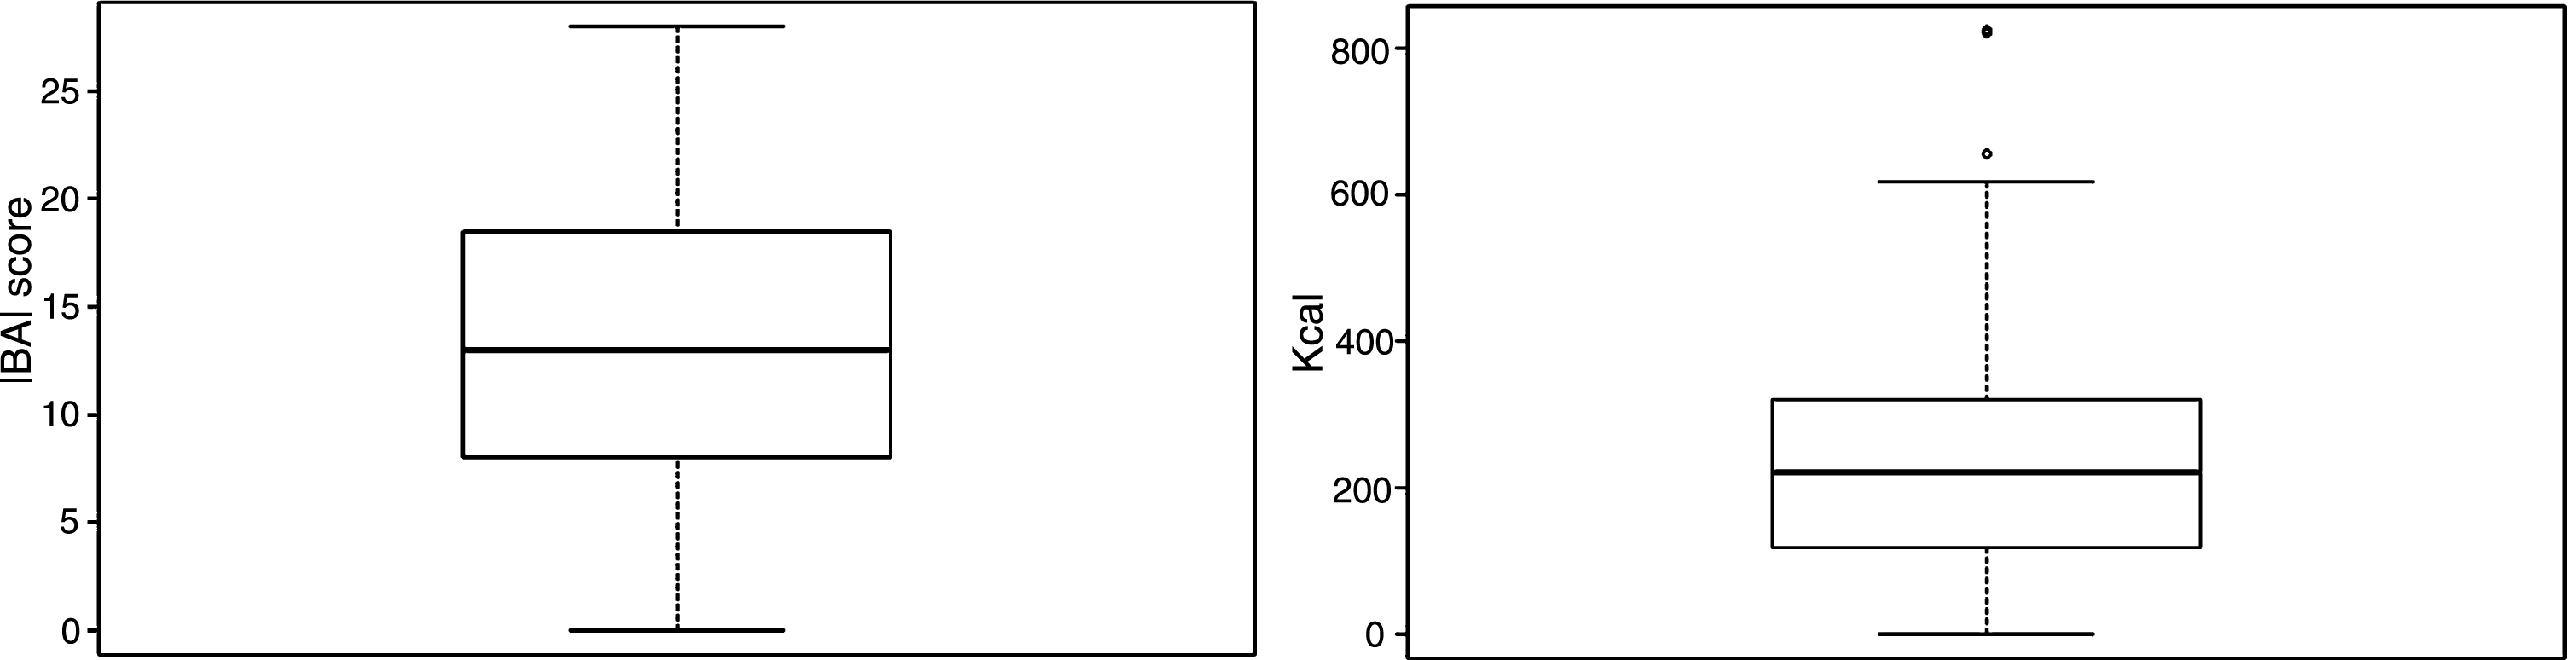 On the left side, IBAI box plot. On the right side, energy intake box plot.